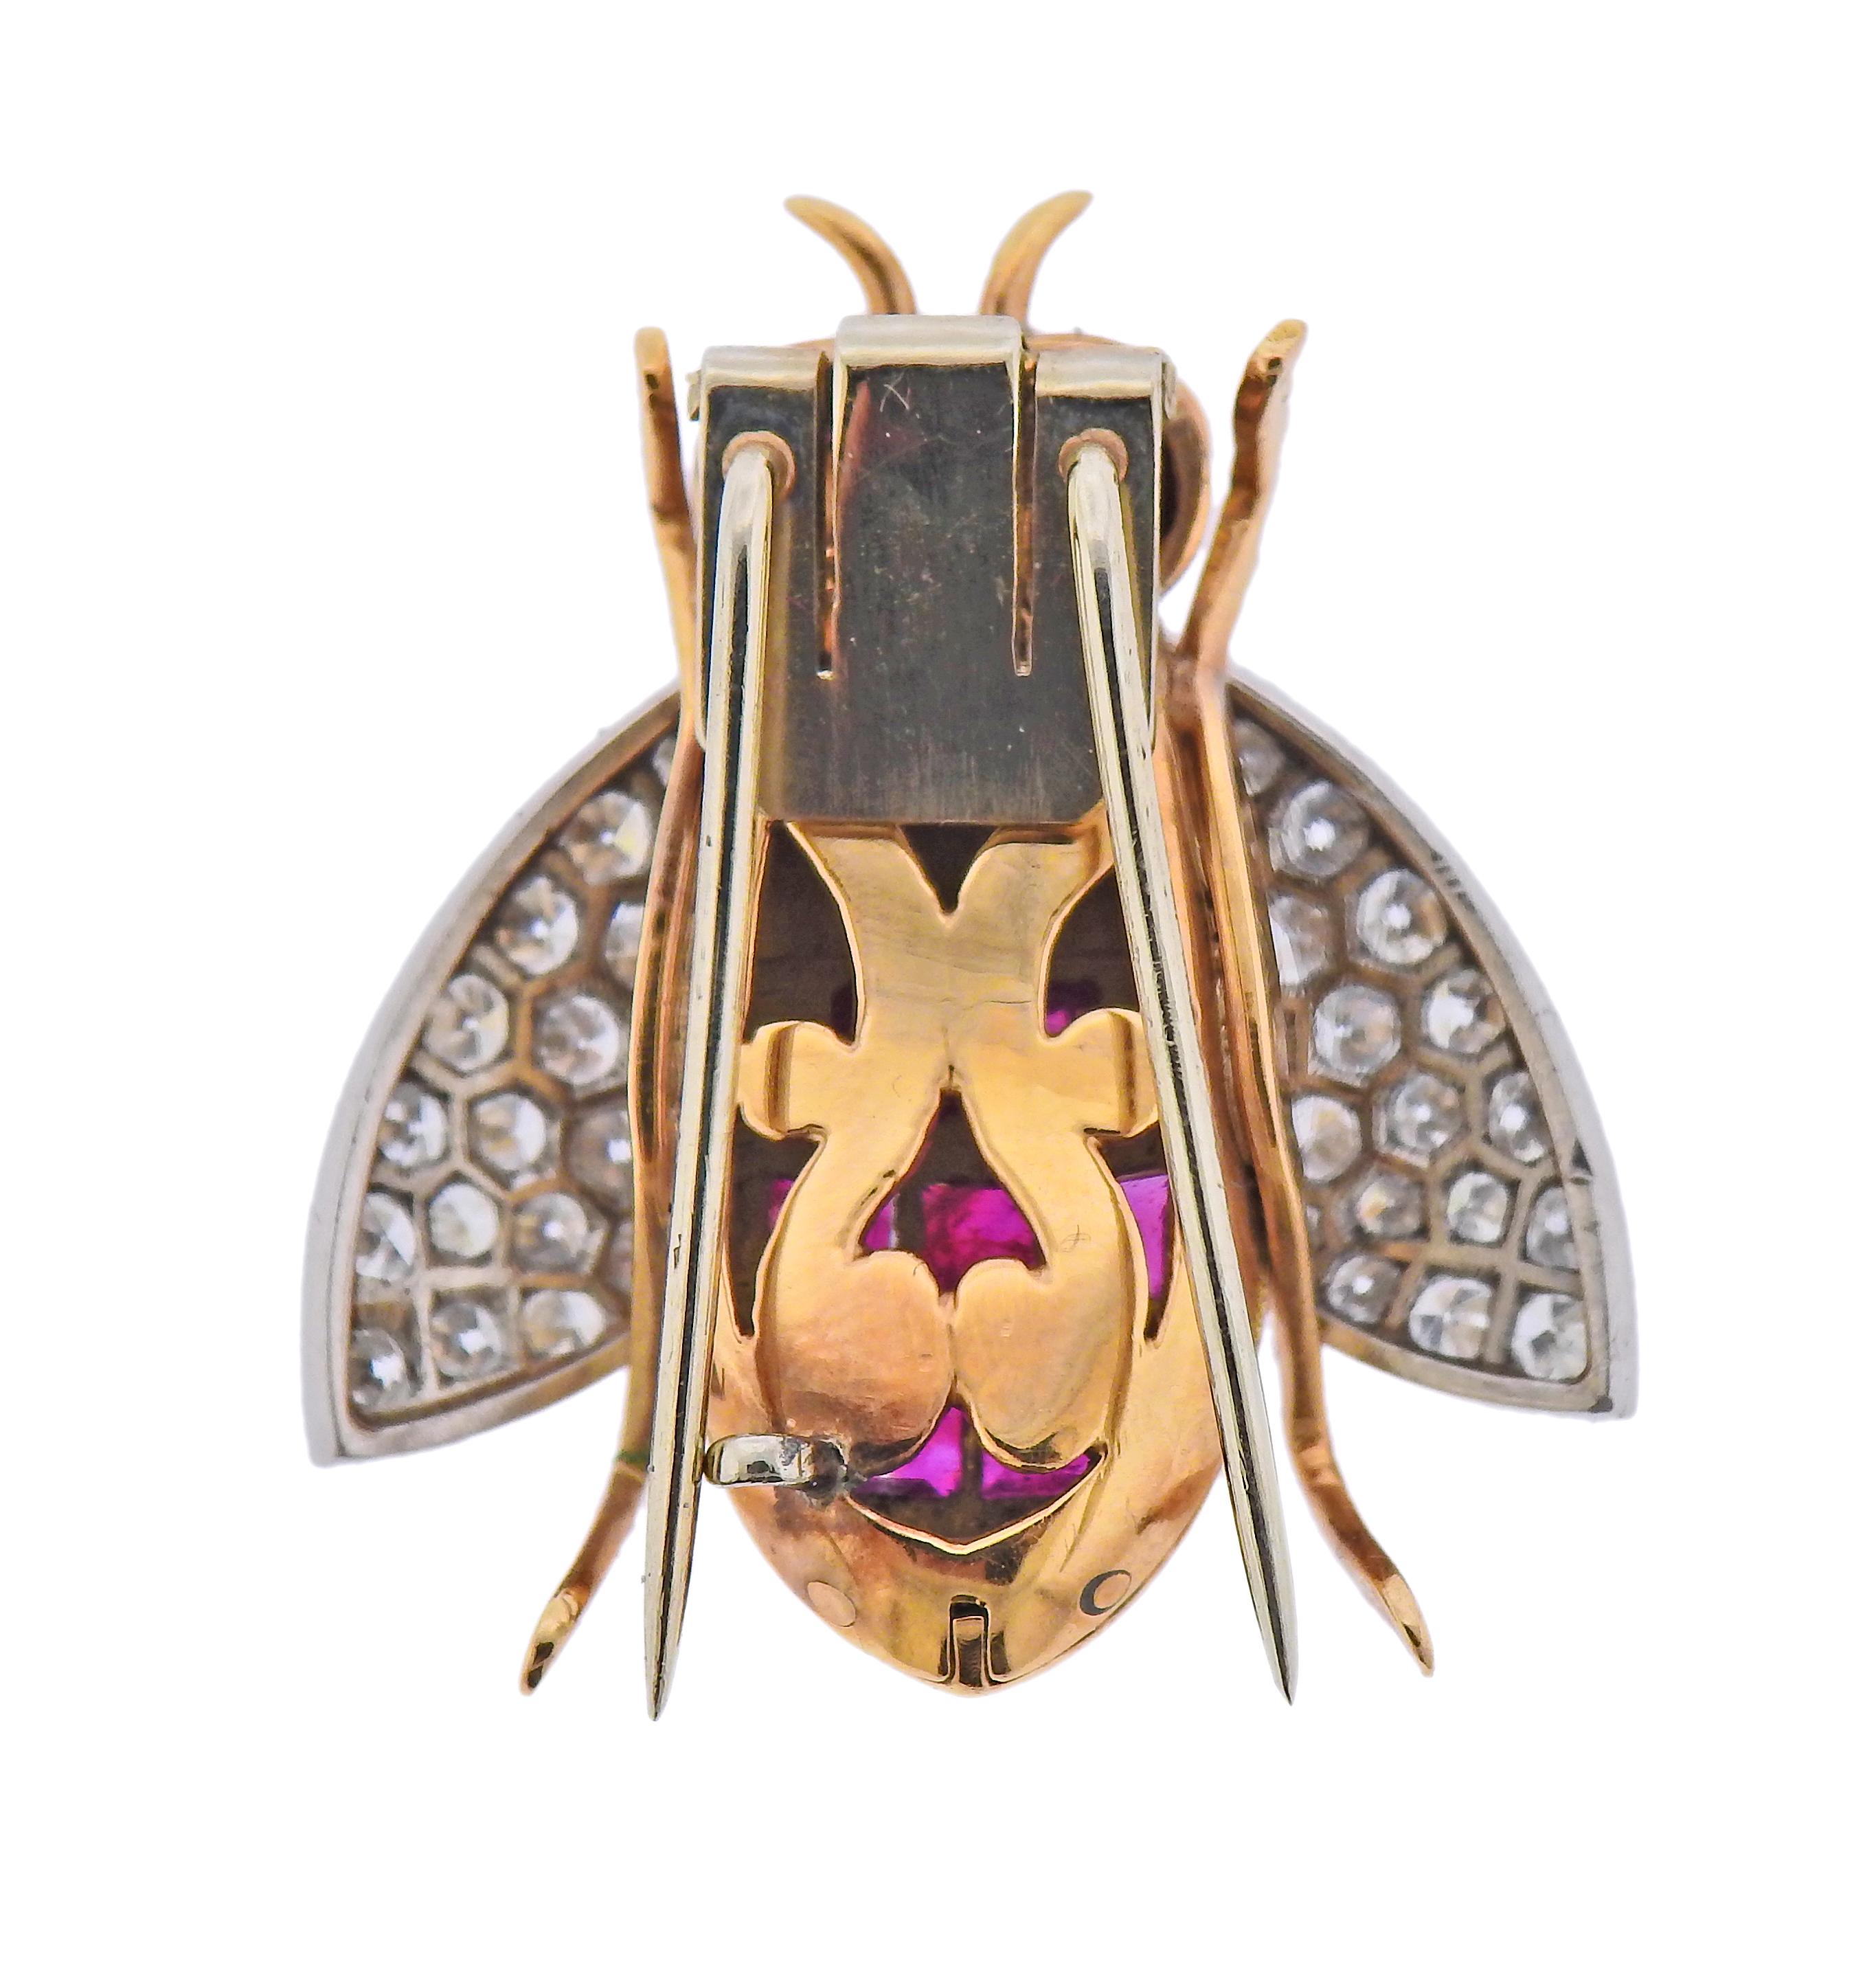 Fontana Roma 18k gold and platinum insect brooch, set with rubies and approx. 1.00cts in diamonds. Brooch is 30mm x 26mm. Marked: Fontana Roma, PT 750. Weight - 11.5 grams.